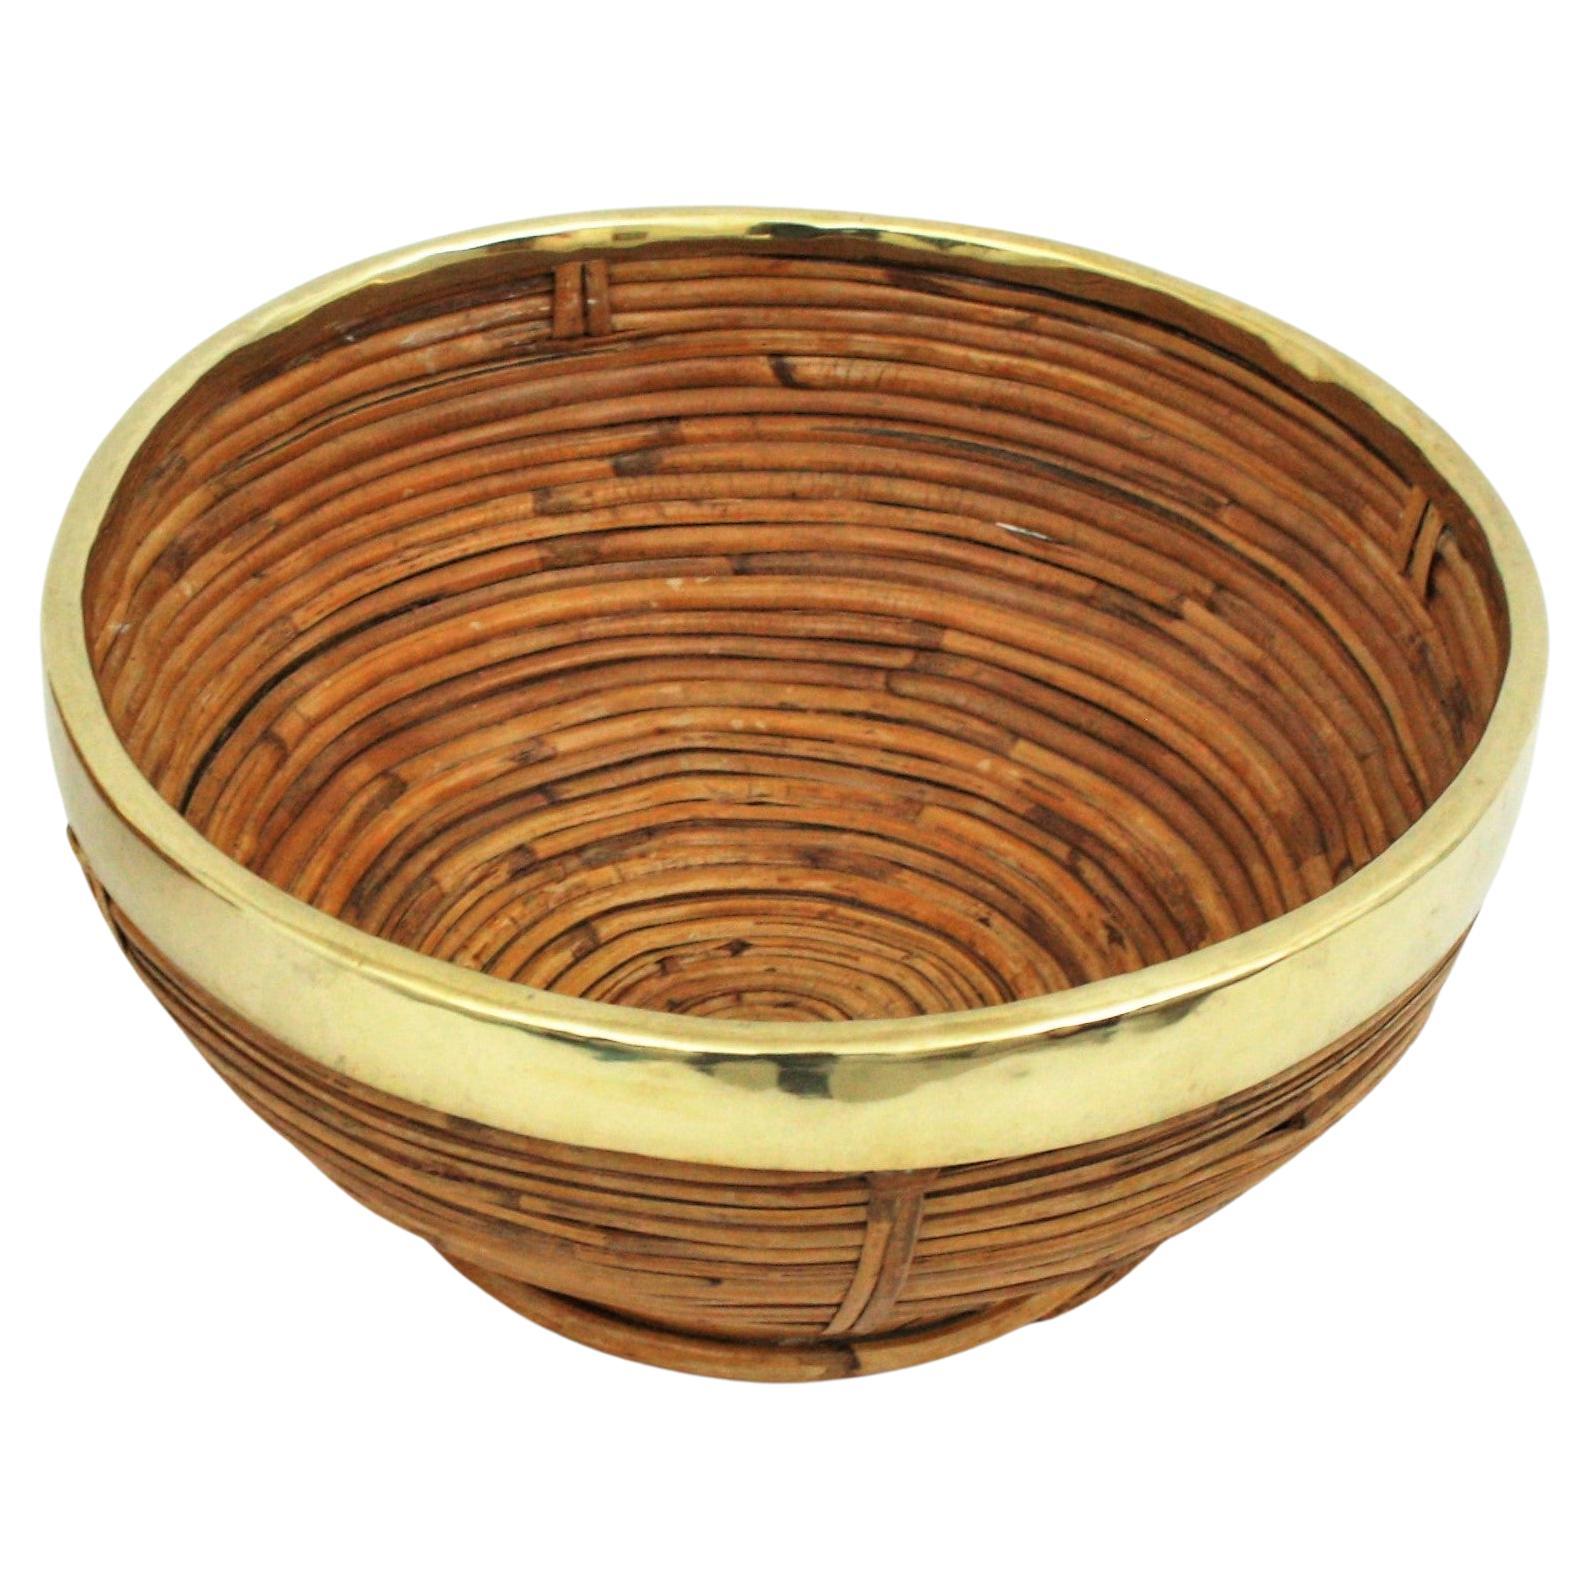 Mid-Century Modern brass and bamboo / rattan large bowl, centerpiece or basket.
It has a brass trim covering the top.
Handcrafted in Italy, 1970s. 
This piece has a design inspired in Gabriella Crespi designs.
Use it as fruit bowl or centerpiece